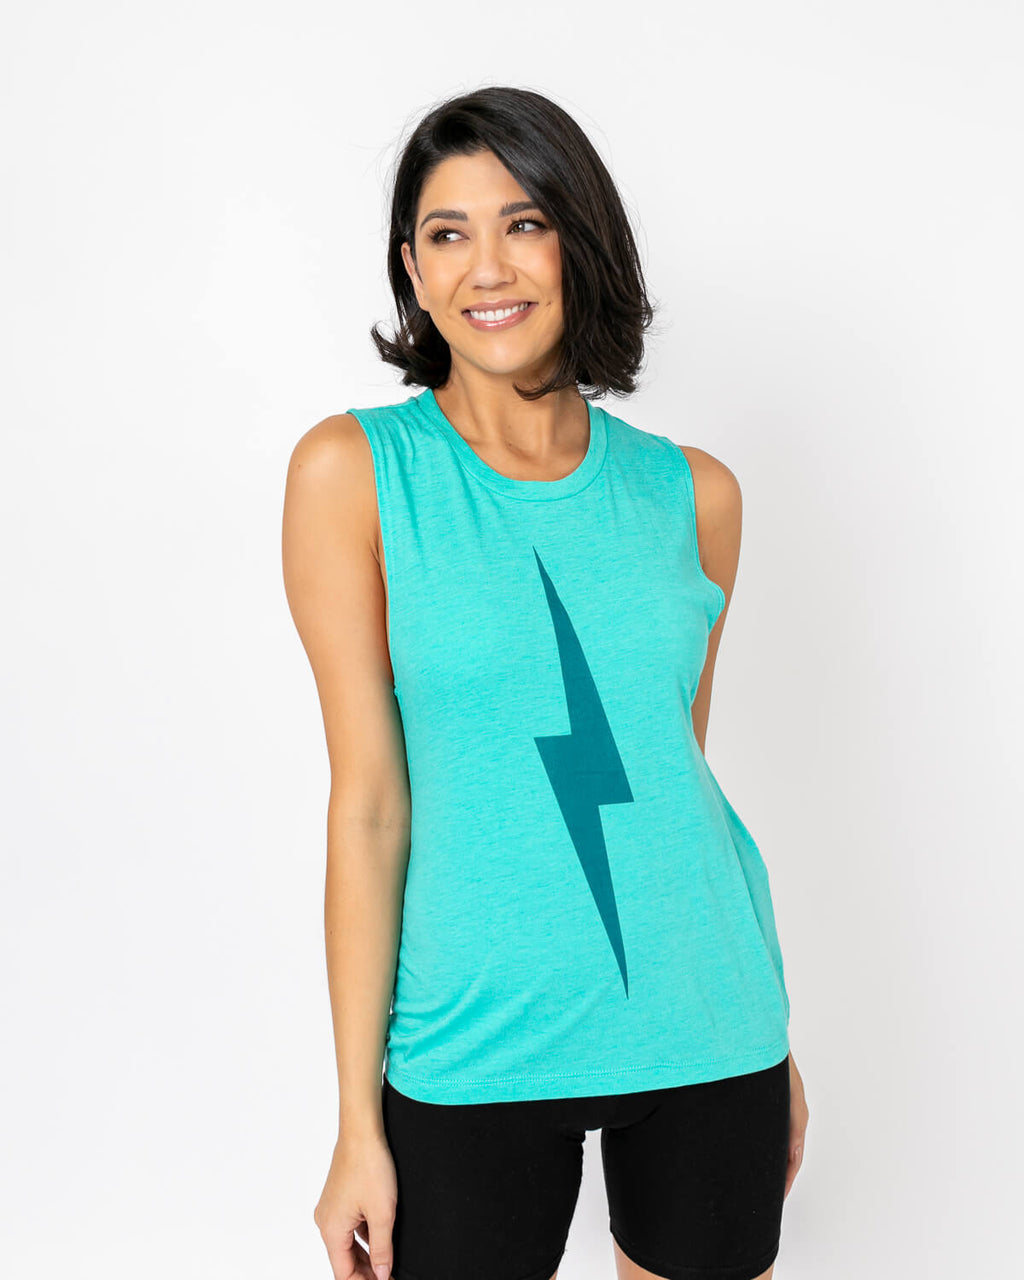 Bolt Muscle Tank | Teal on Teal